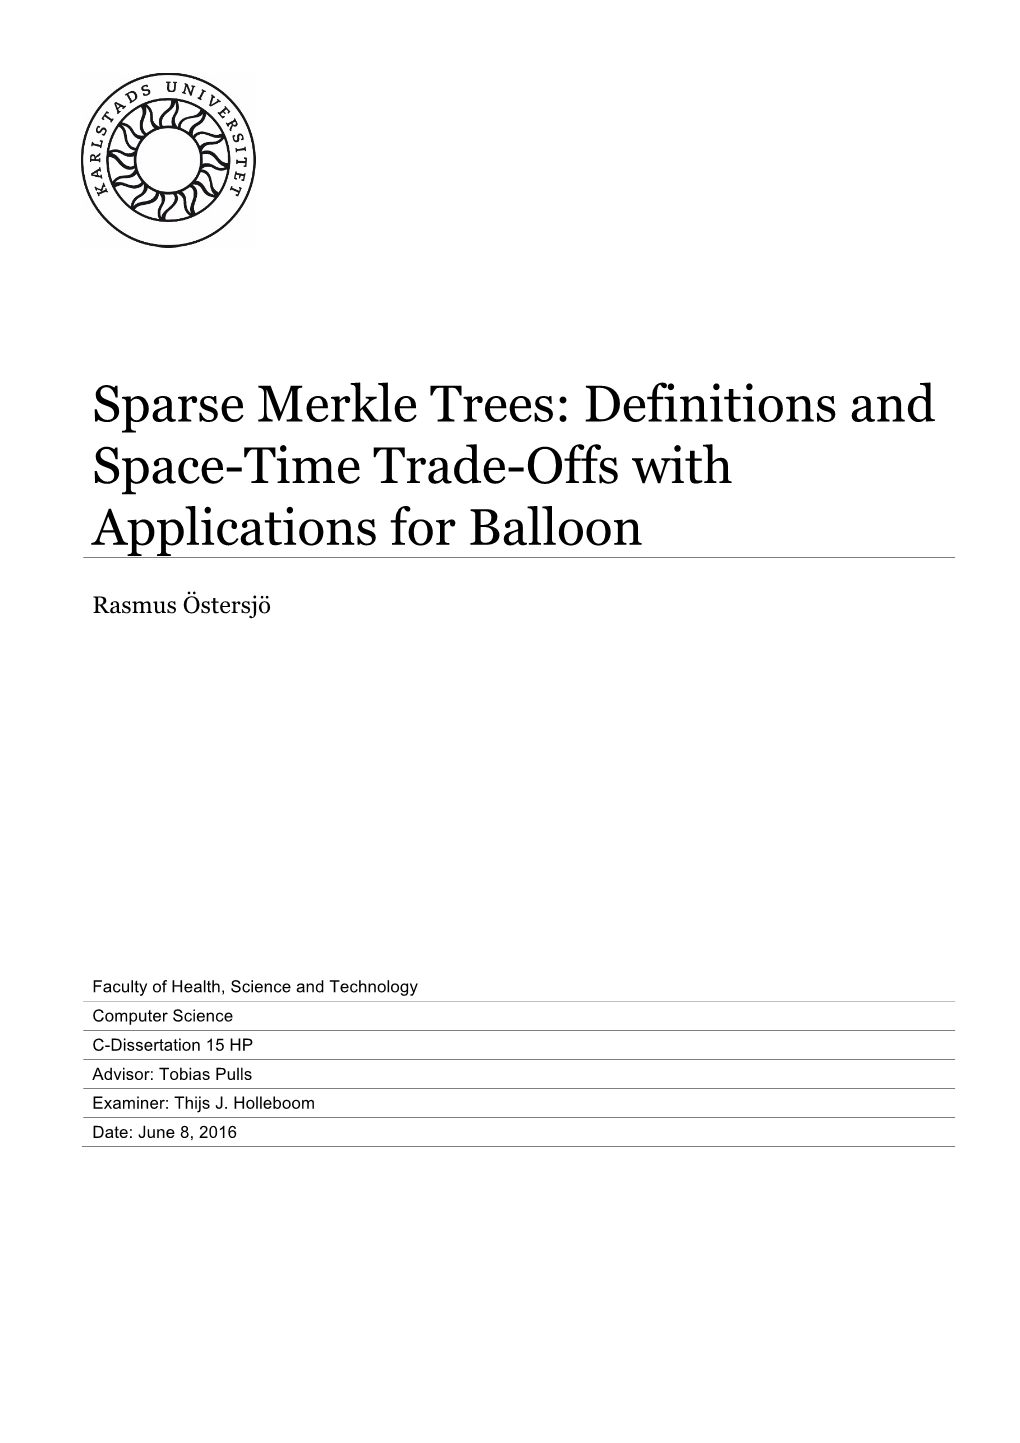 Sparse Merkle Trees: Definitions and Space-Time Trade-Offs With